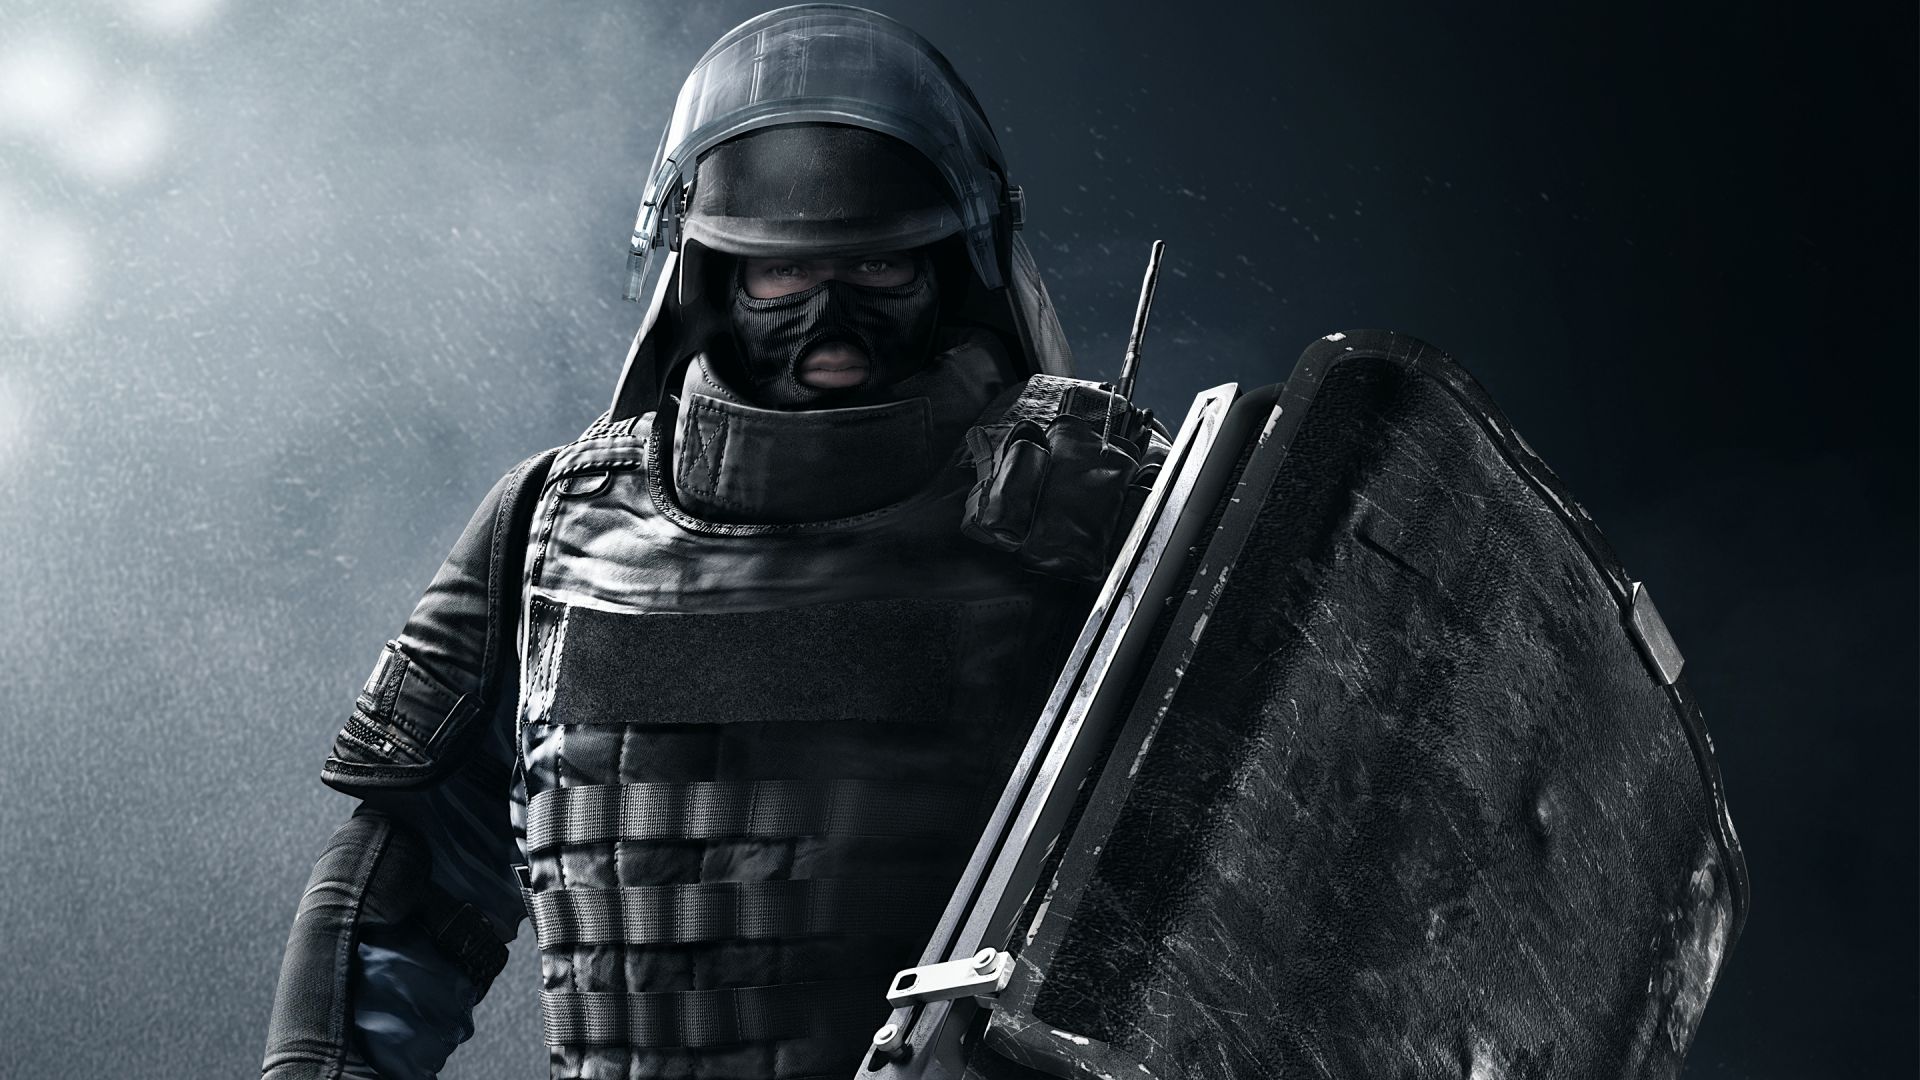 Wallpaper Tom clancy's rainbow six siege video game, gign montagne